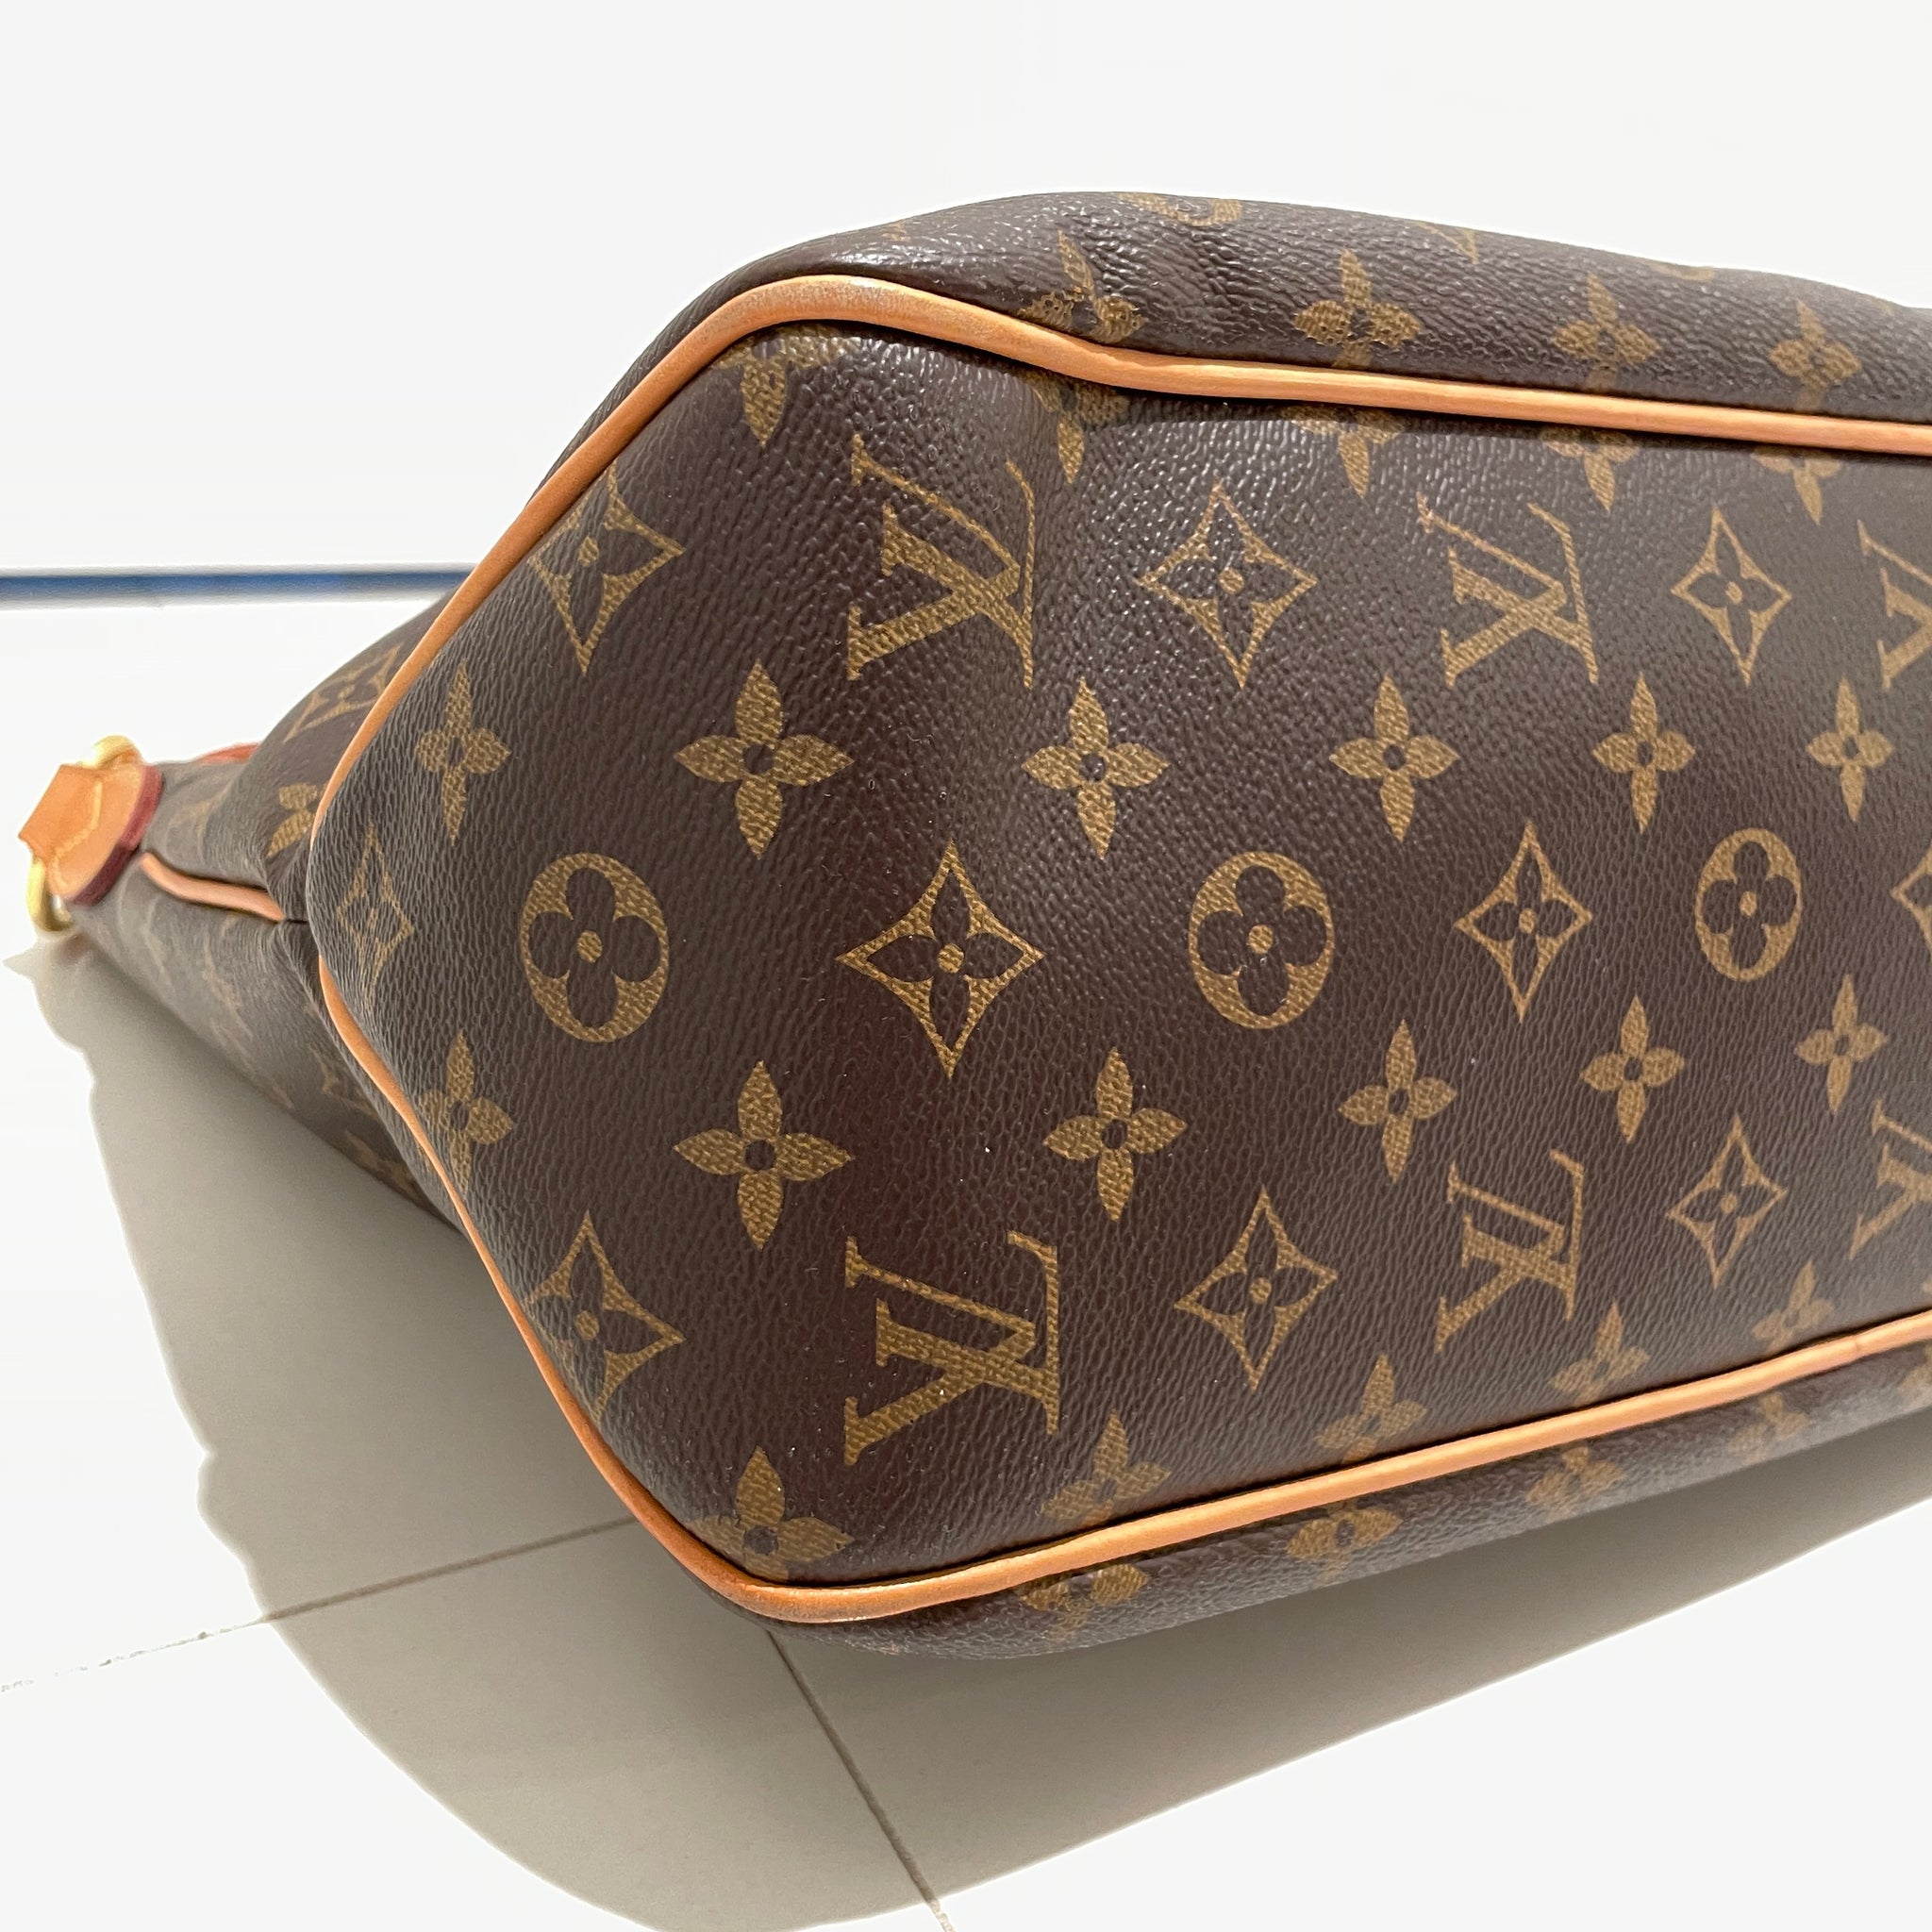 Louis Vuitton Delightful MM Monogram Tote with Pivone - A World Of